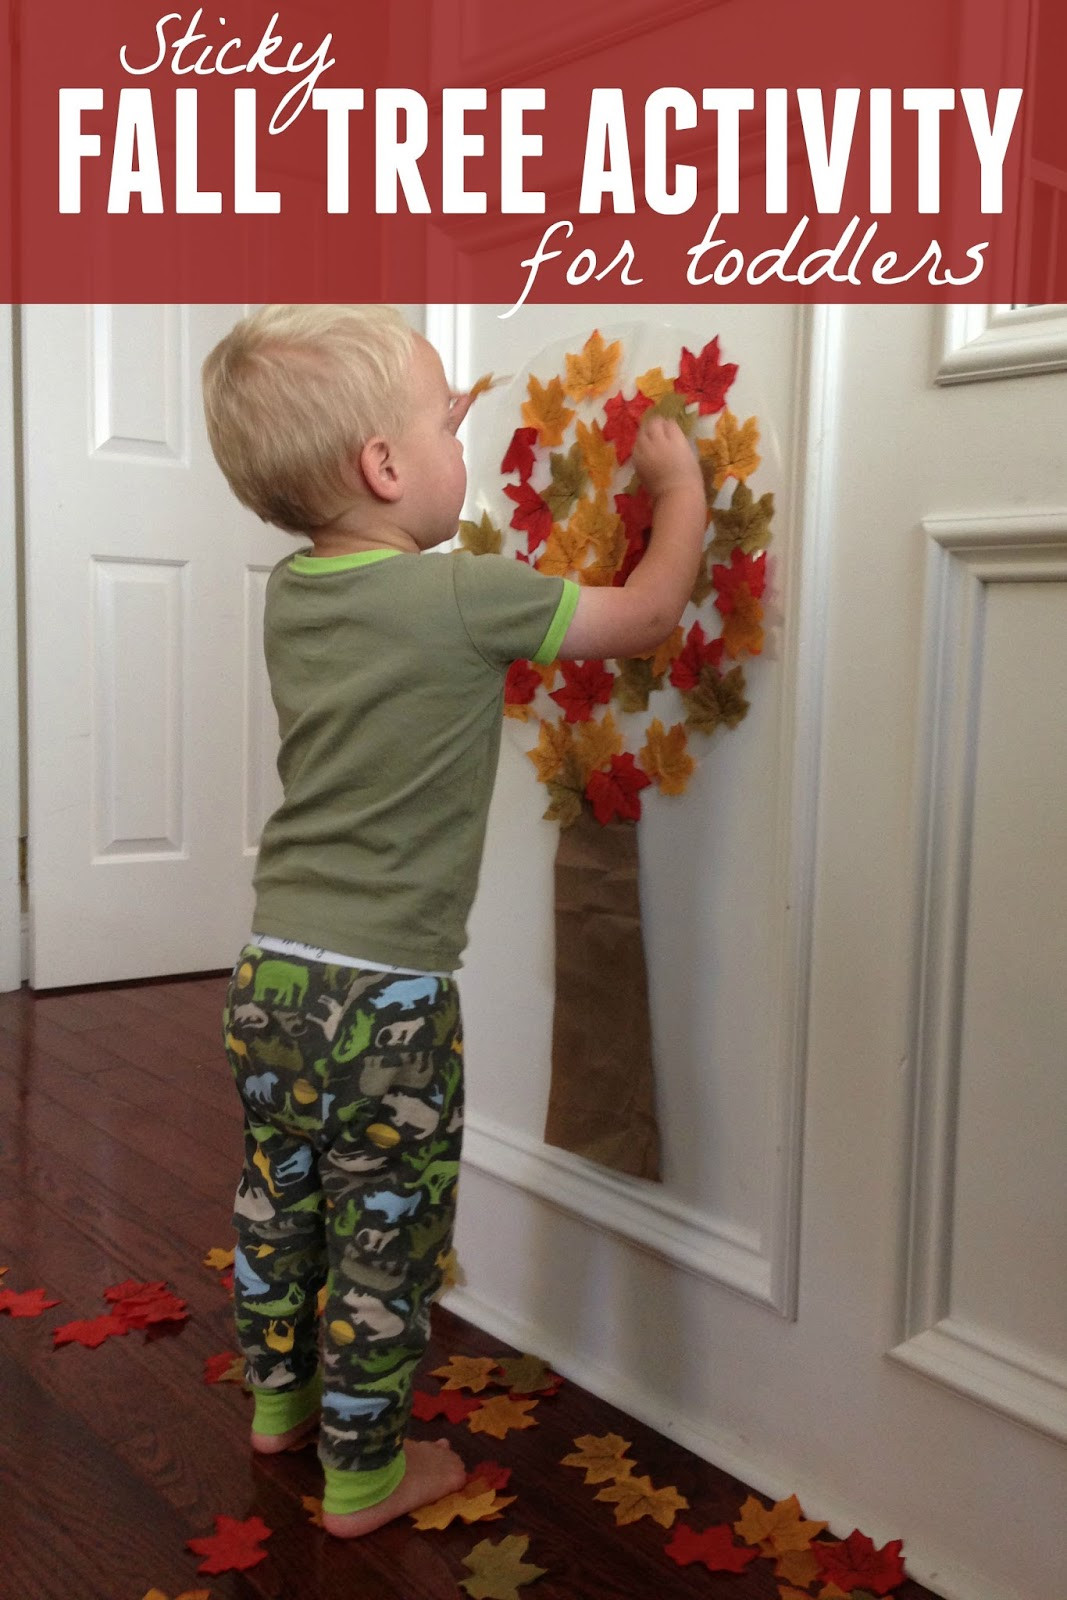 Fall Toddler Craft Ideas
 Toddler Approved Easy Fall Tree Activity for Toddlers